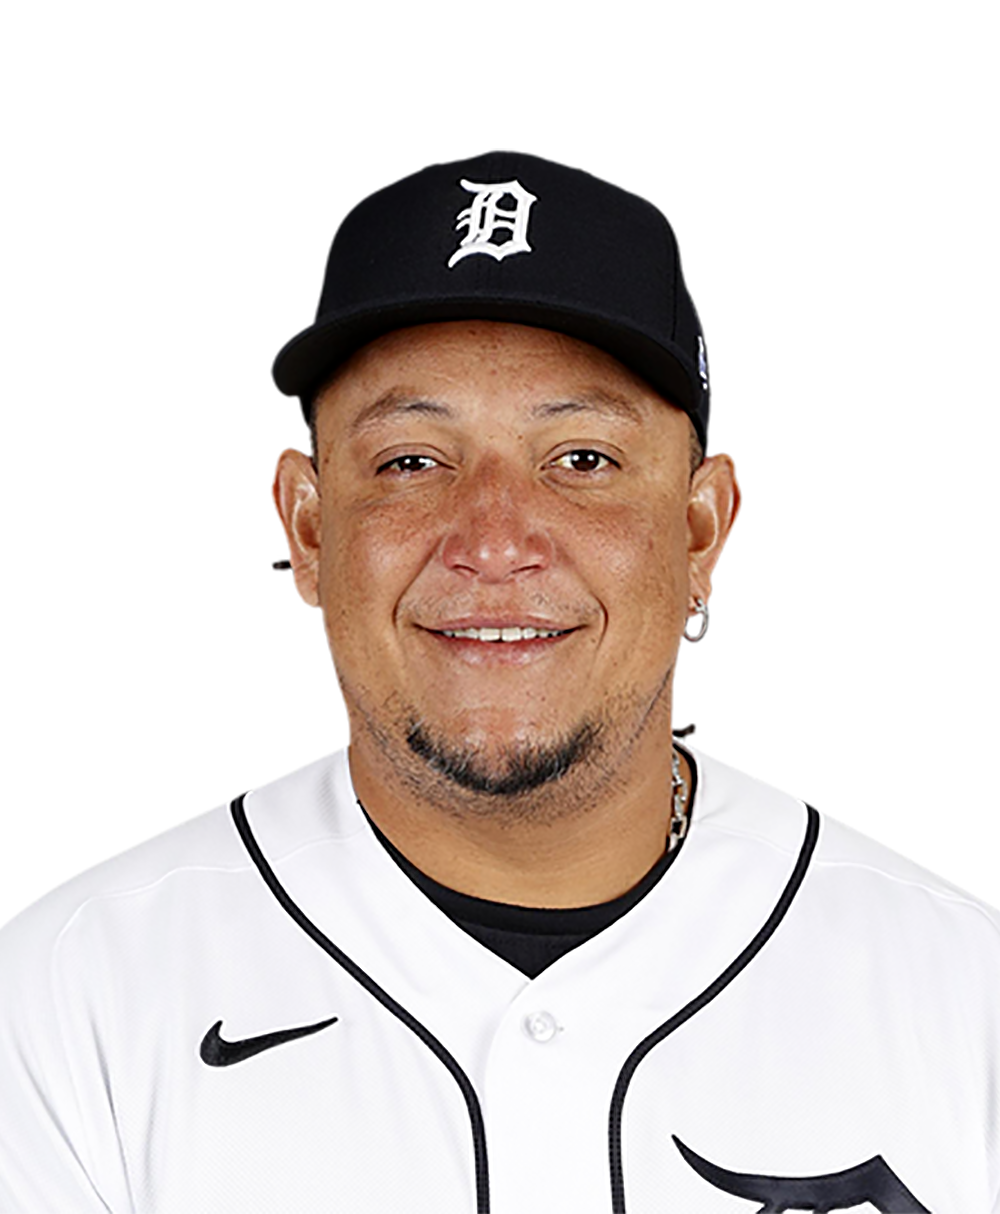 A's gift recovering alcoholic Miguel Cabrera bottle of wine - Los